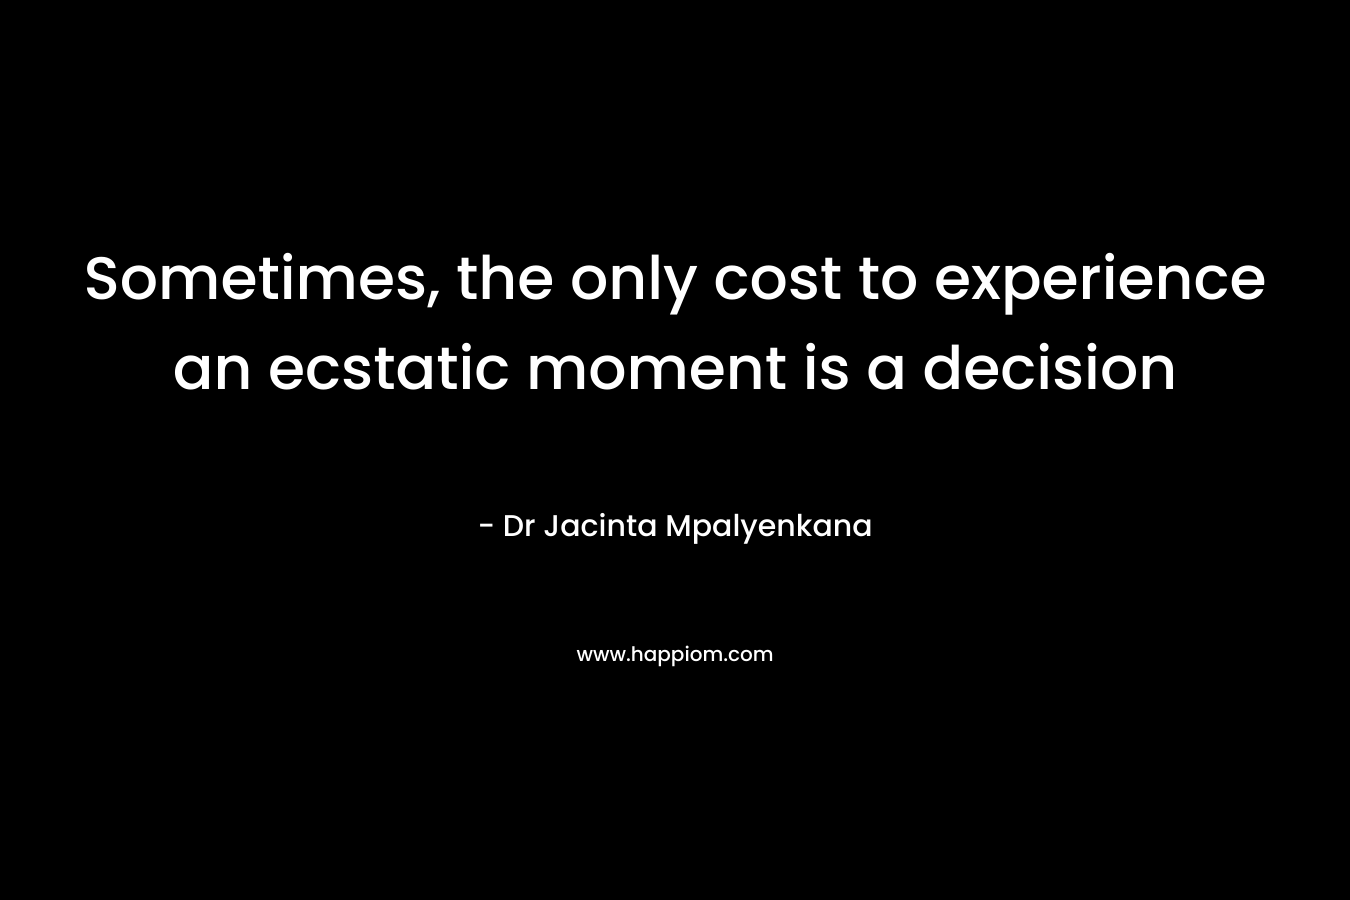 Sometimes, the only cost to experience an ecstatic moment is a decision